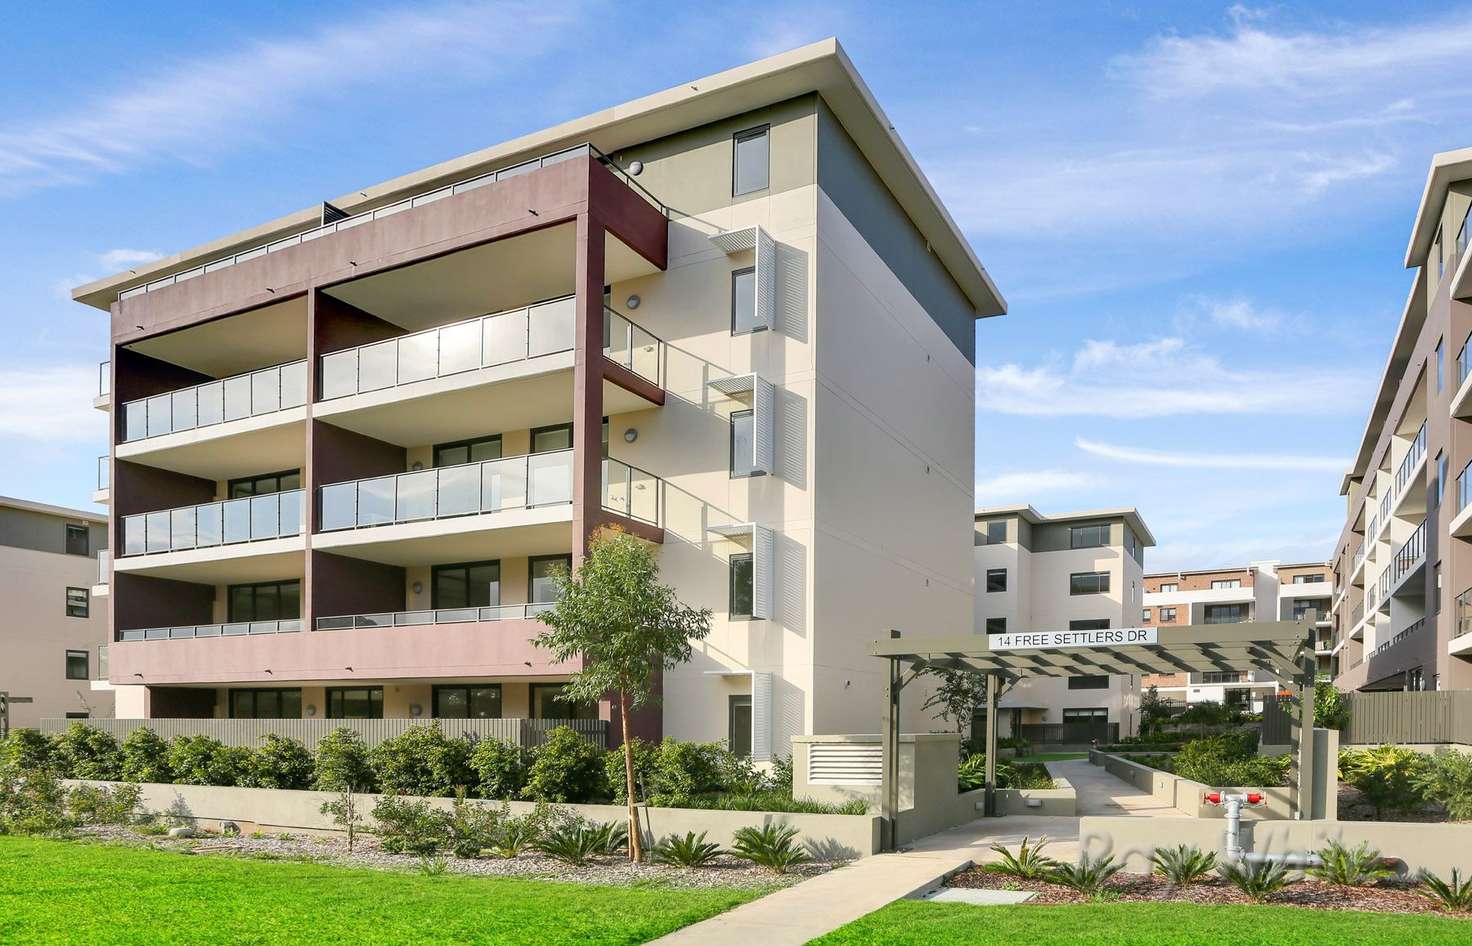 Main view of Homely unit listing, 215/14 Free Settlers Drive, Kellyville NSW 2155